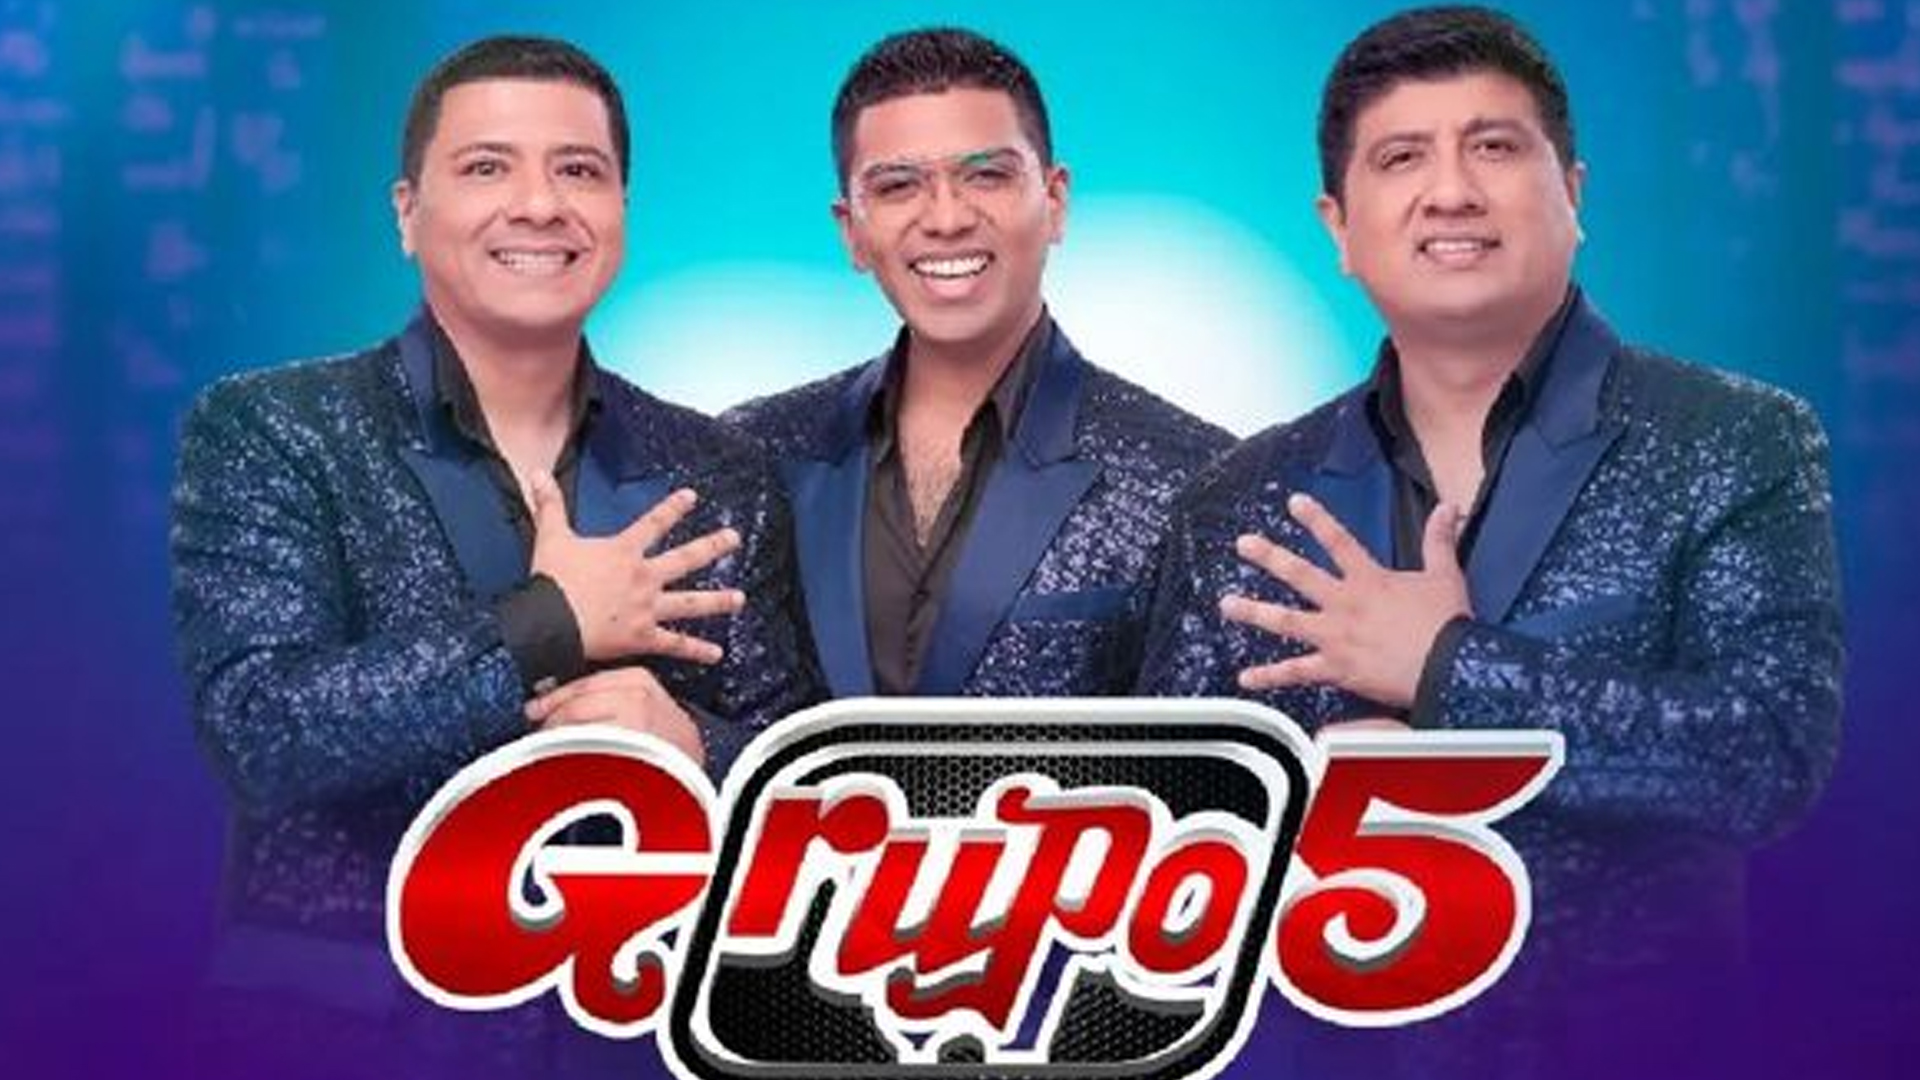 Grupo 5 sold out at all its 50th anniversary concerts.